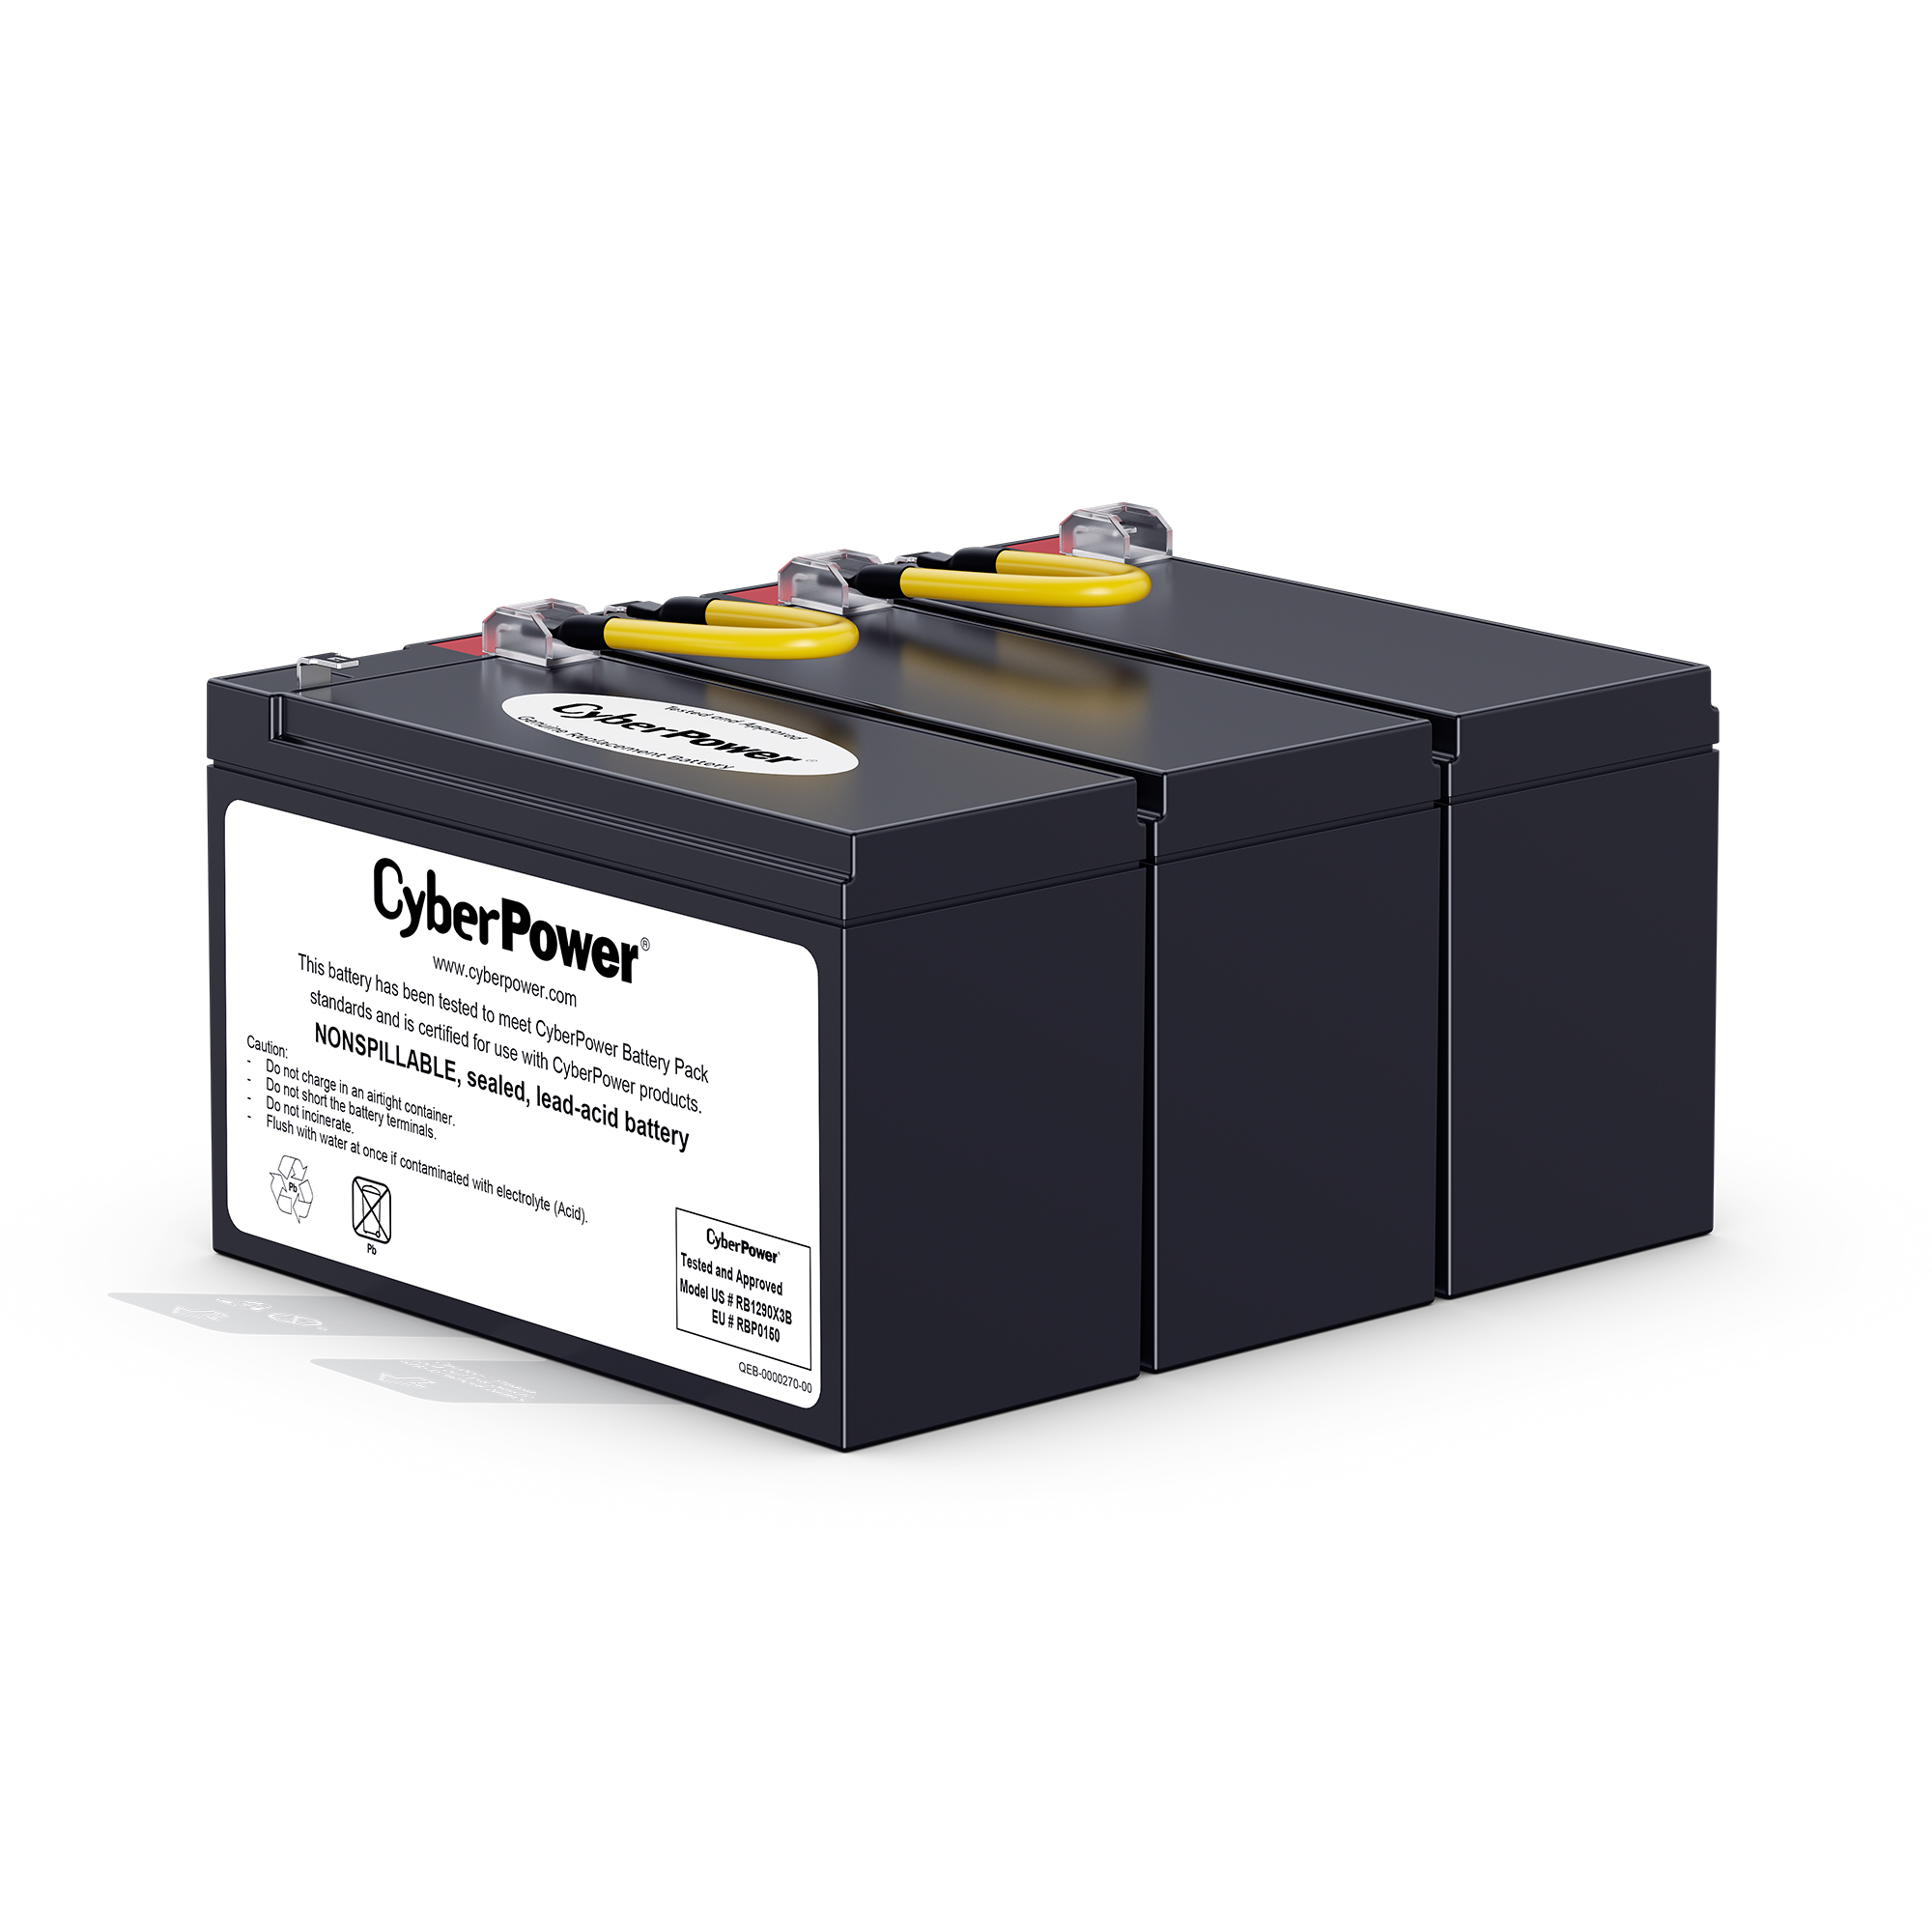 CyberPower RB1280X2B Replacement Battery Cartridge User Installable Maintenance-Free